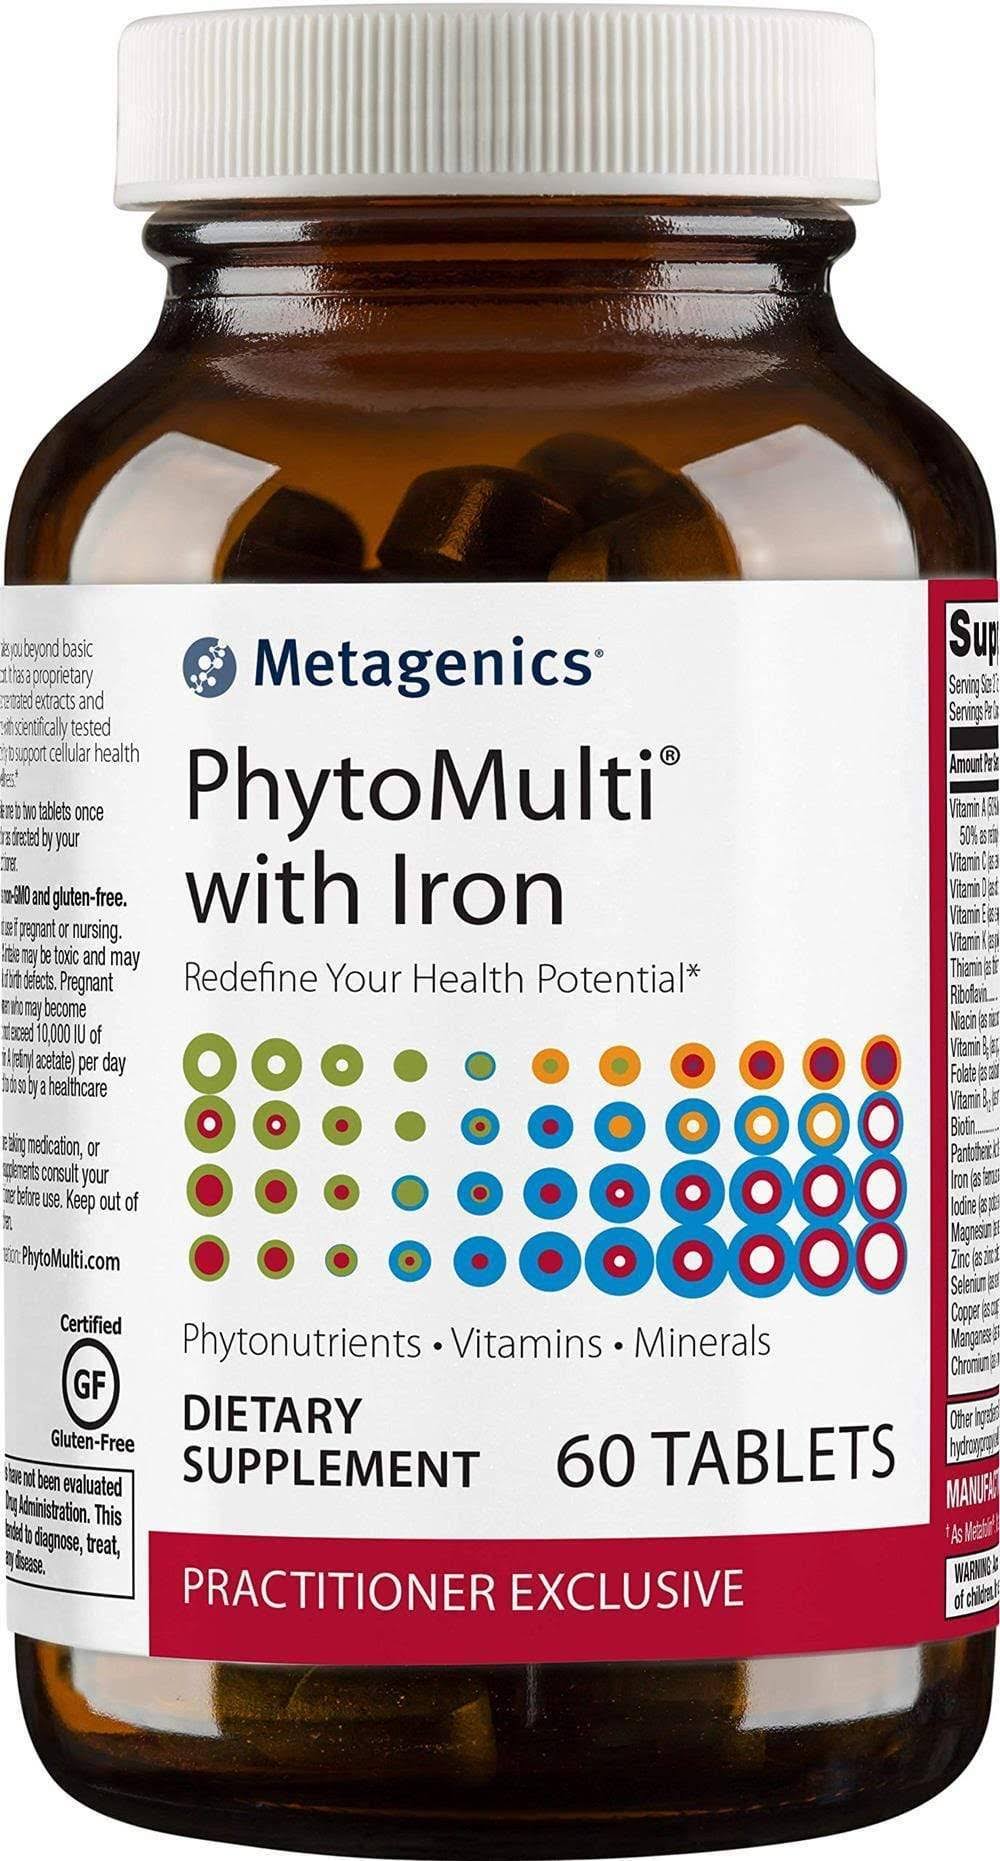 Metagenics PhytoMulti with Iron - 60 Tablets